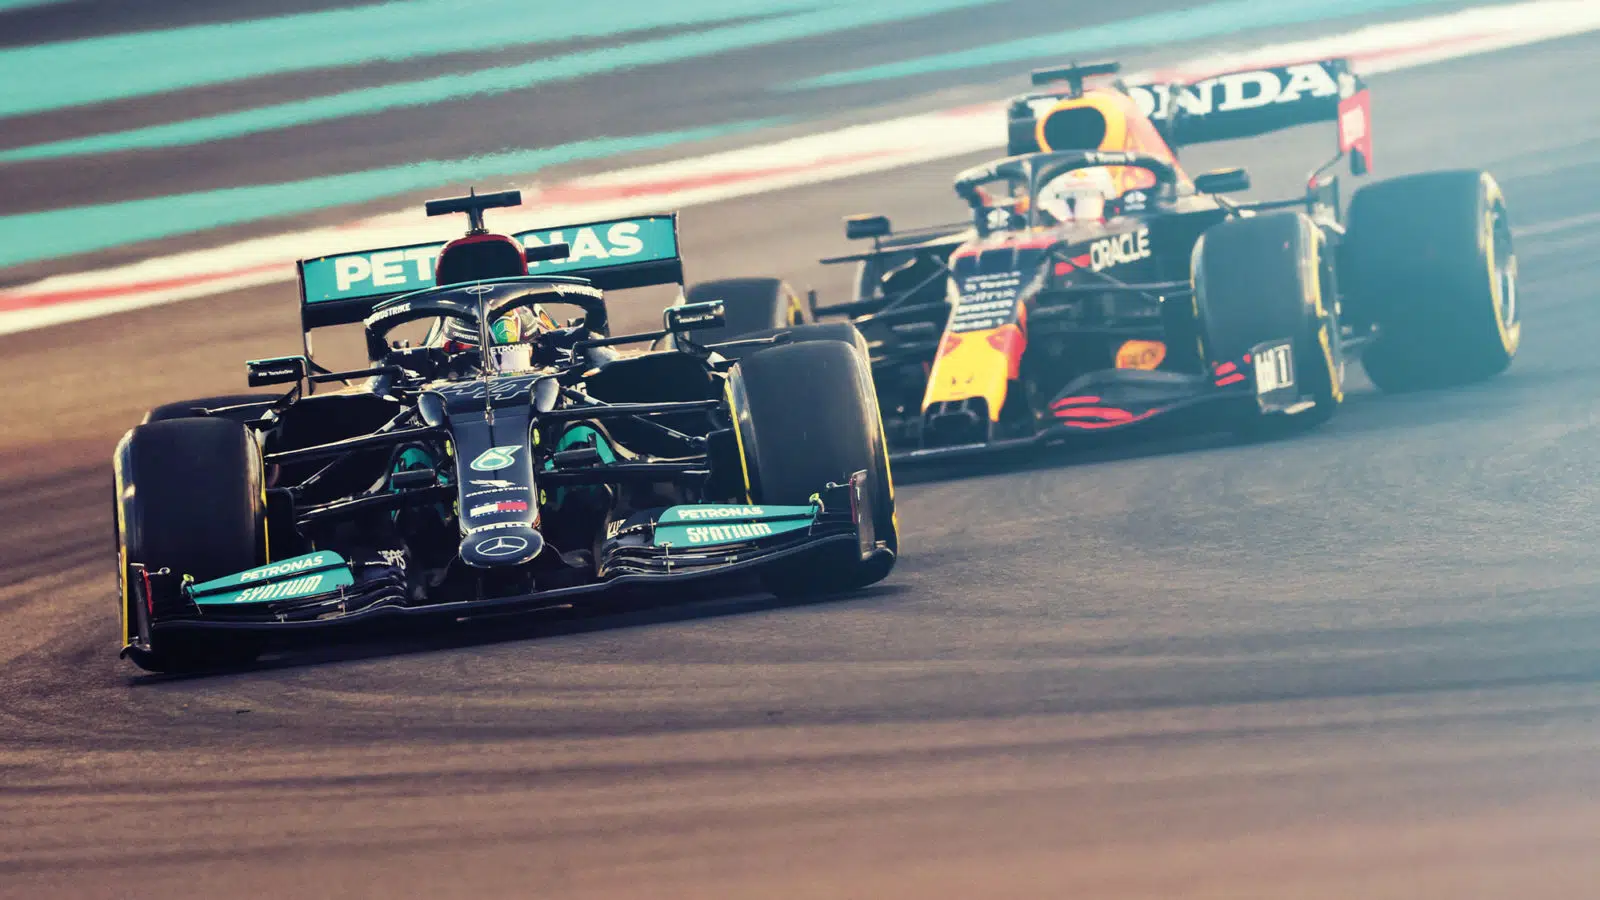 Lewis Hamilton ahead of Max Verstappen in practice for the 2021 Abu Dhabi Grand Prix